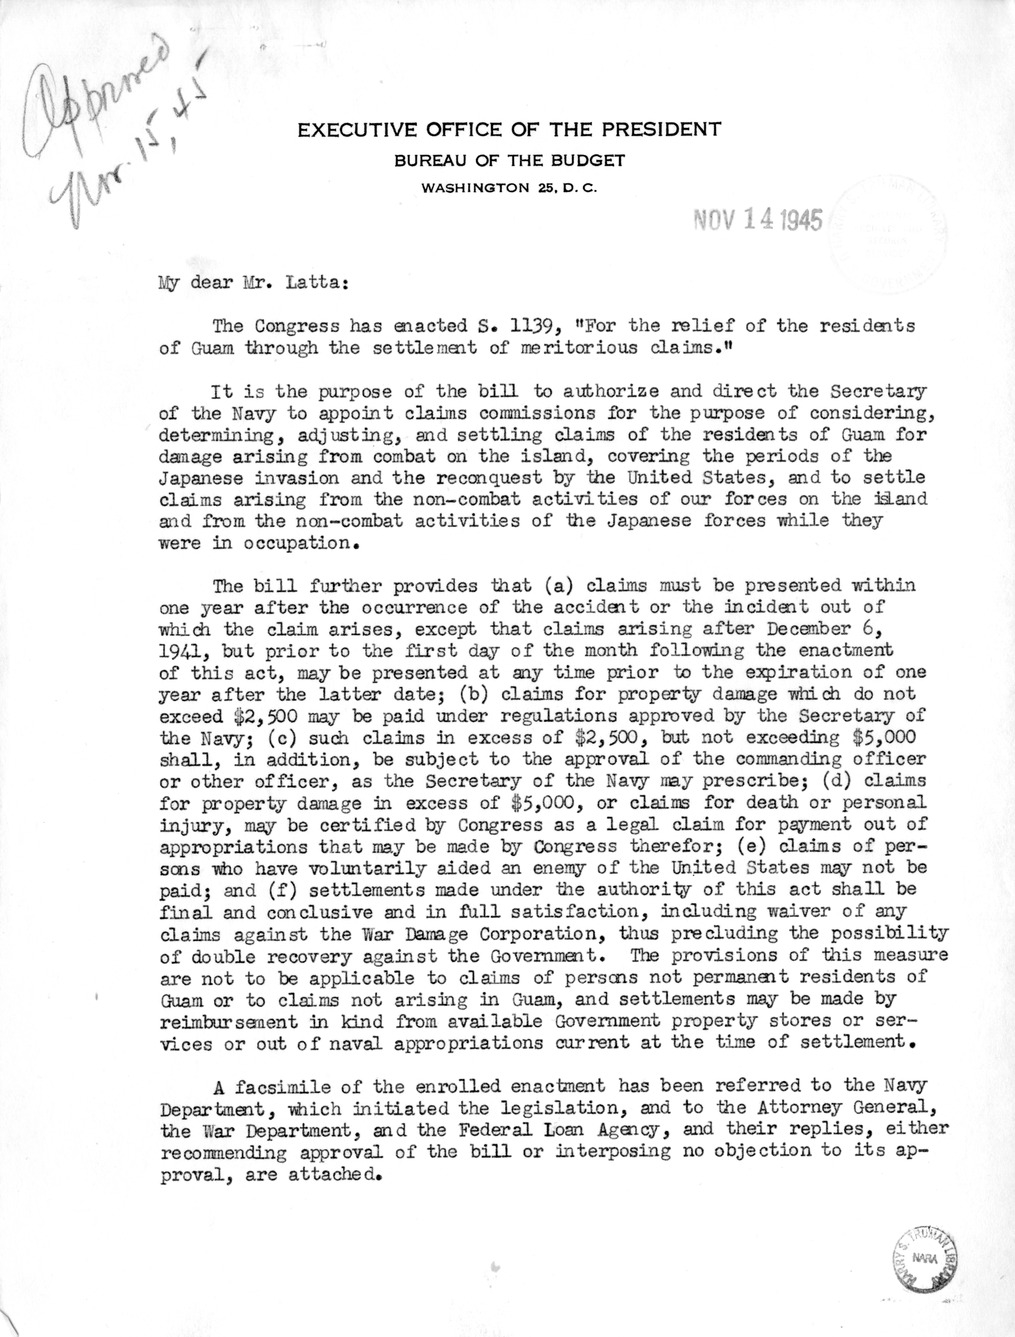 Memorandum from Harold D. Smith to M. C. Latta, S. 1139, For the Relief of the Residents of Guam Through the Settlement of Meritorious Claims, with Attachments